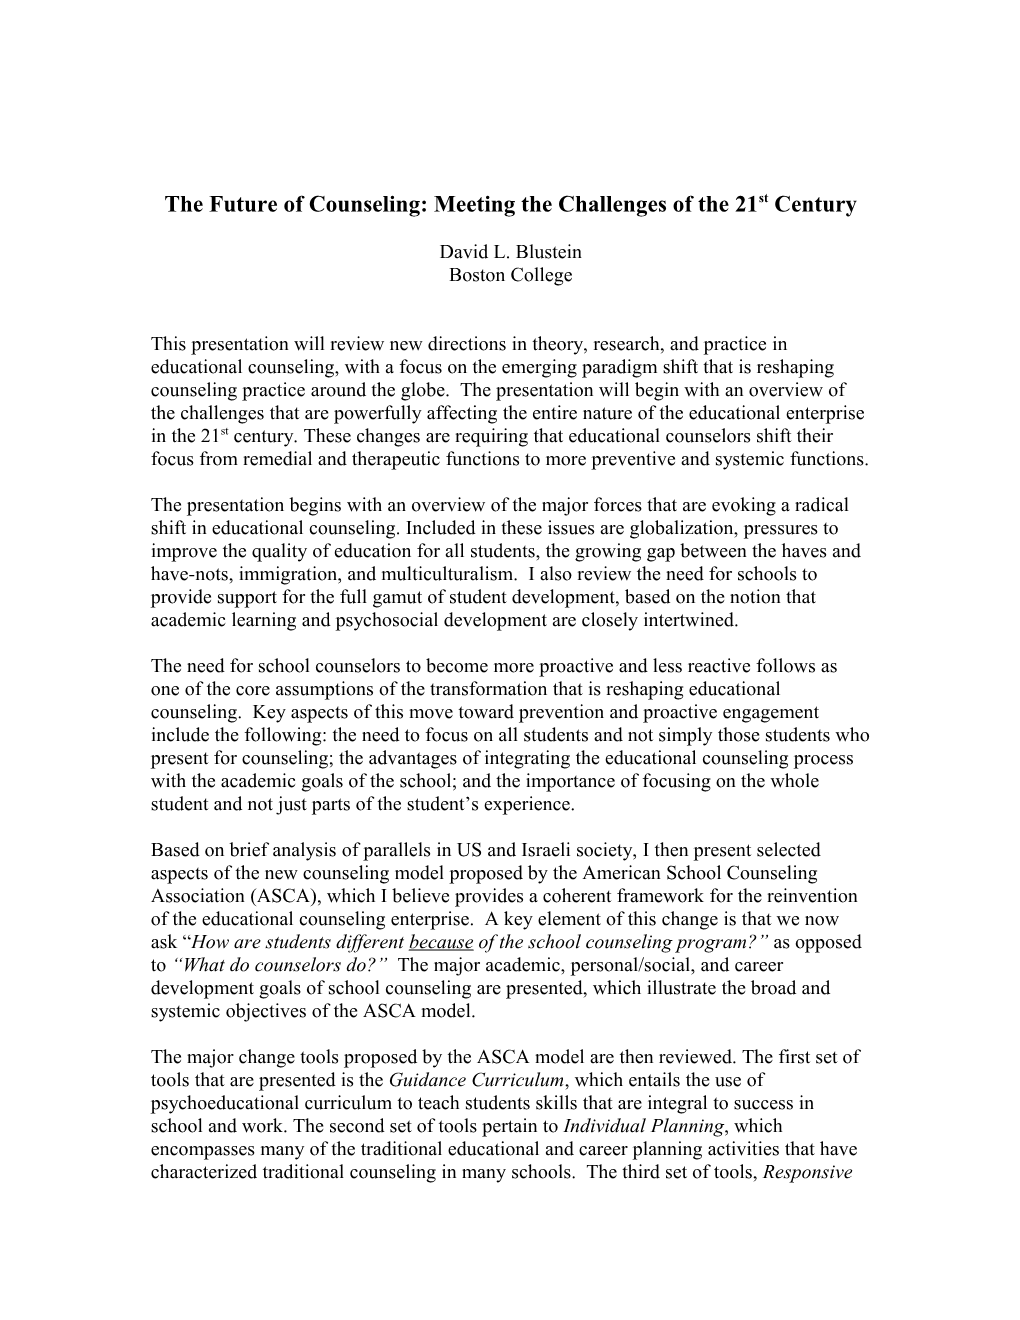 The Future of Counseling: Meeting the Challenges of the 21St Century